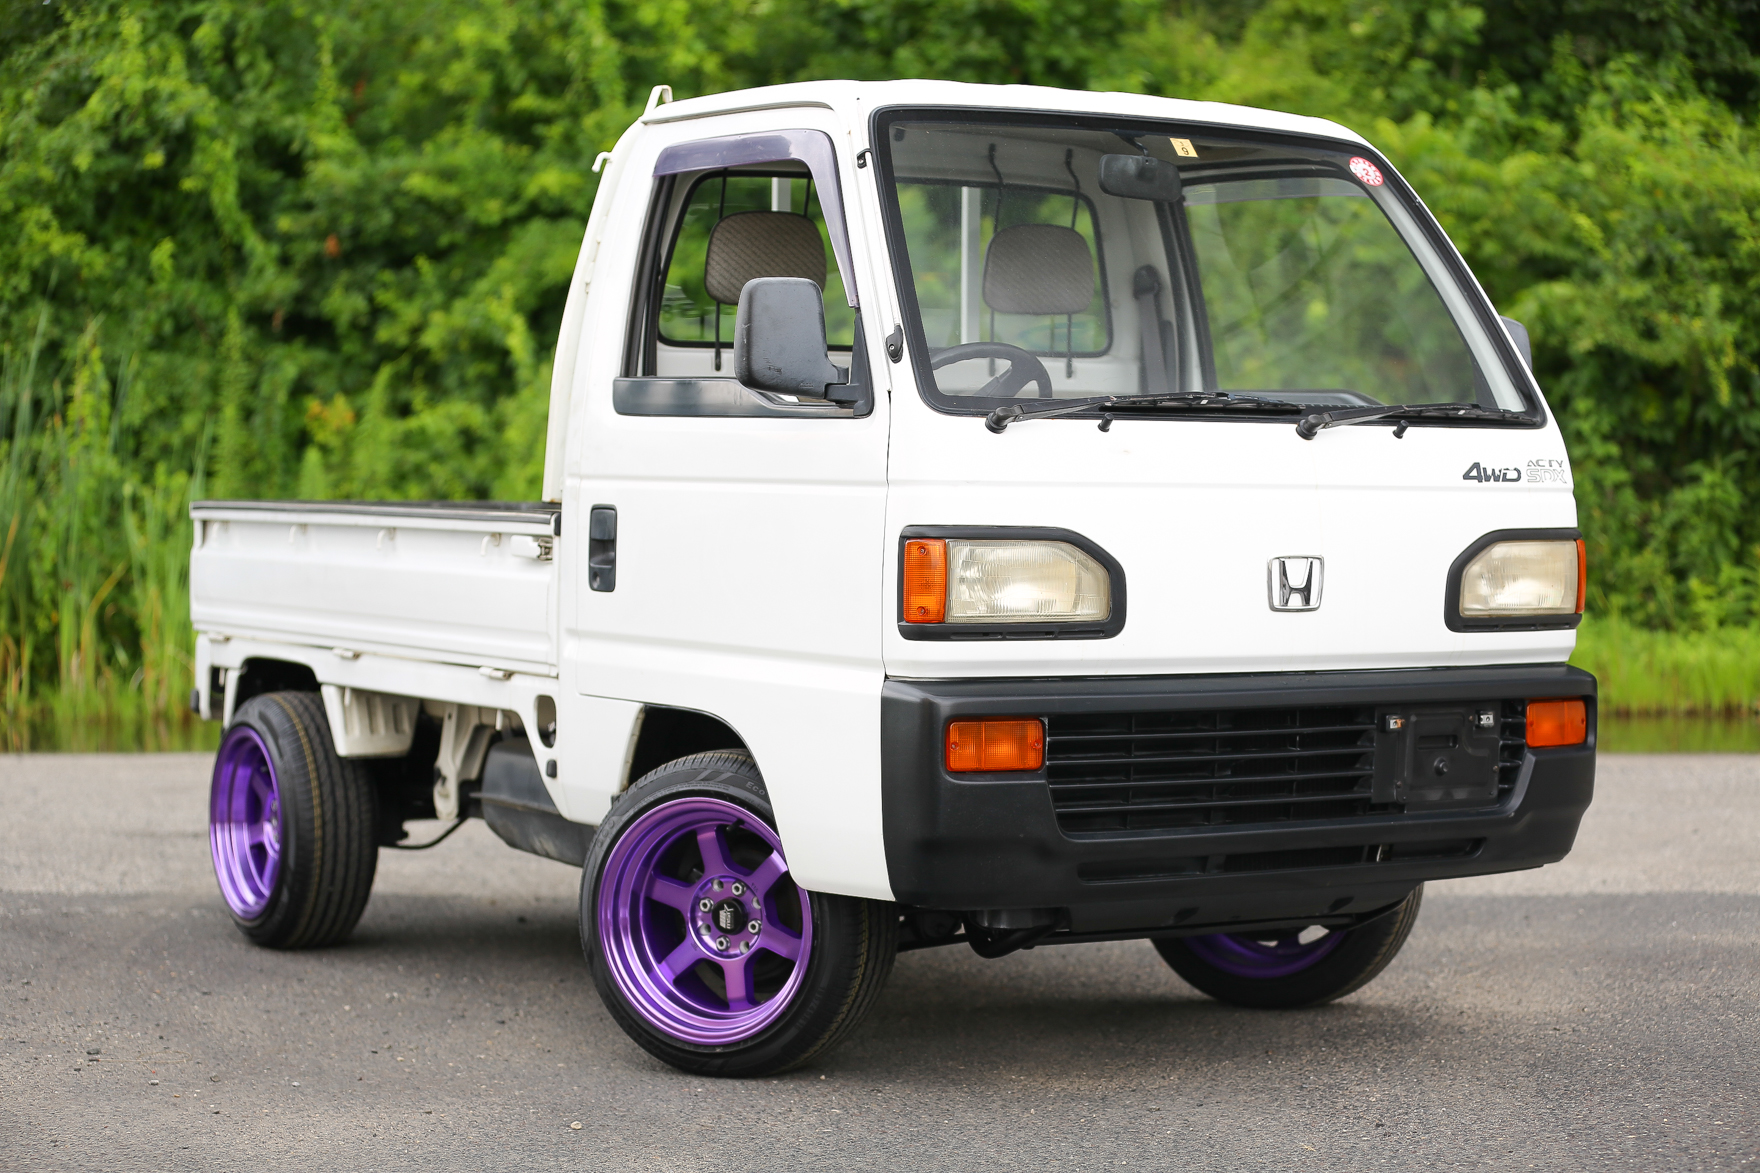 1991 Honda ACTY - Available for $8,750